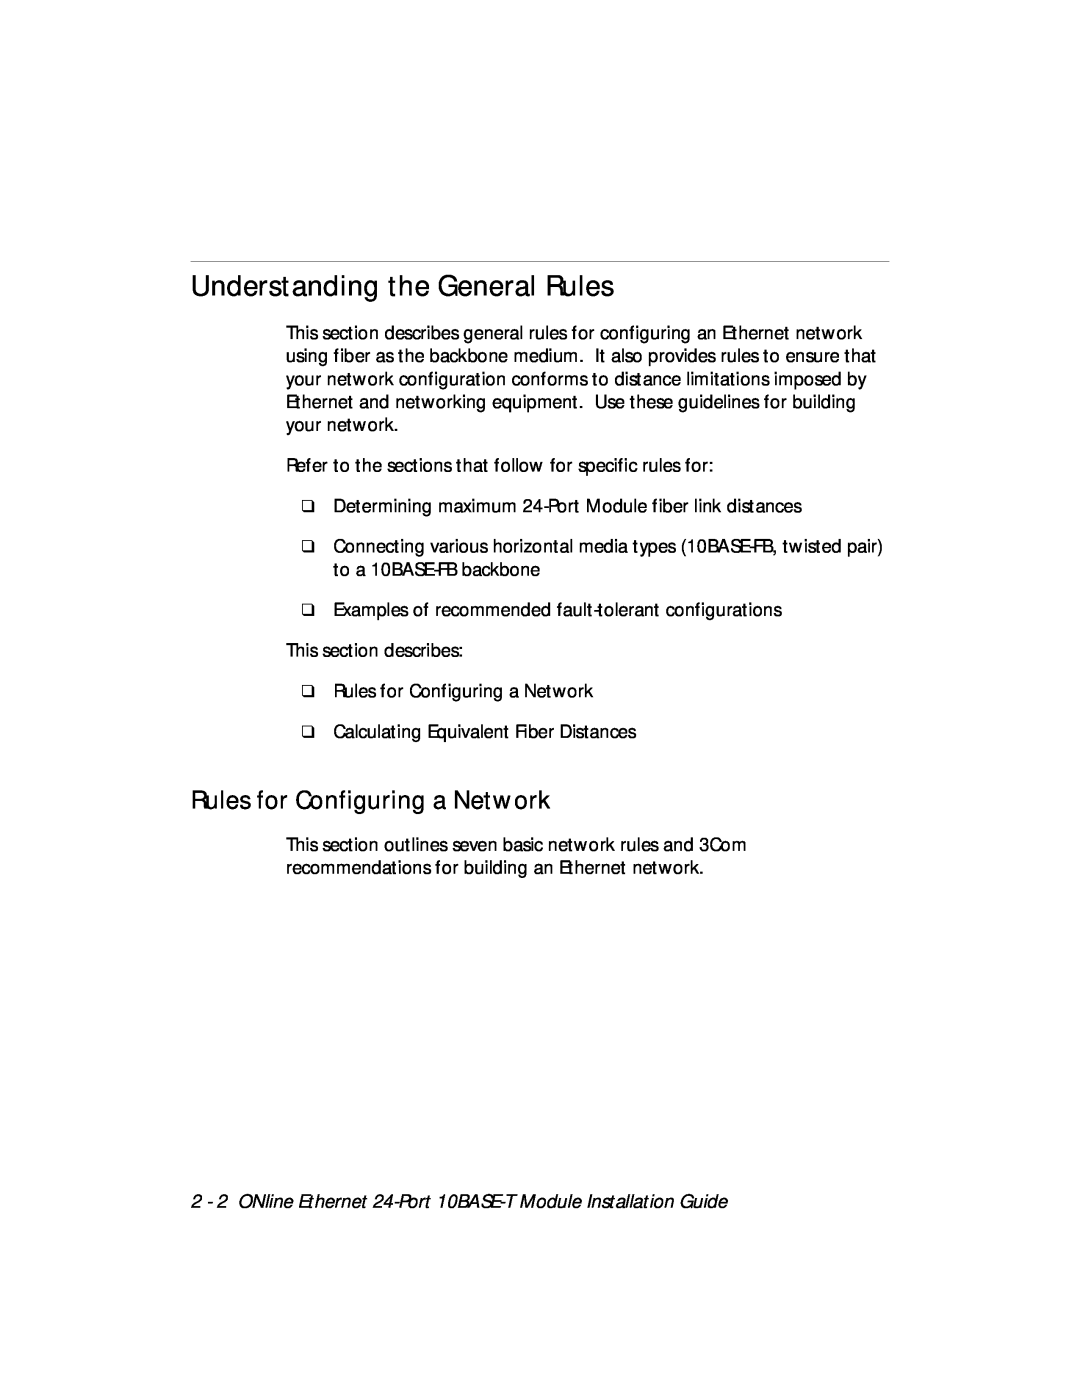 3Com 5124M-TPCL manual Understanding the General Rules, Rules for Configuring a Network 